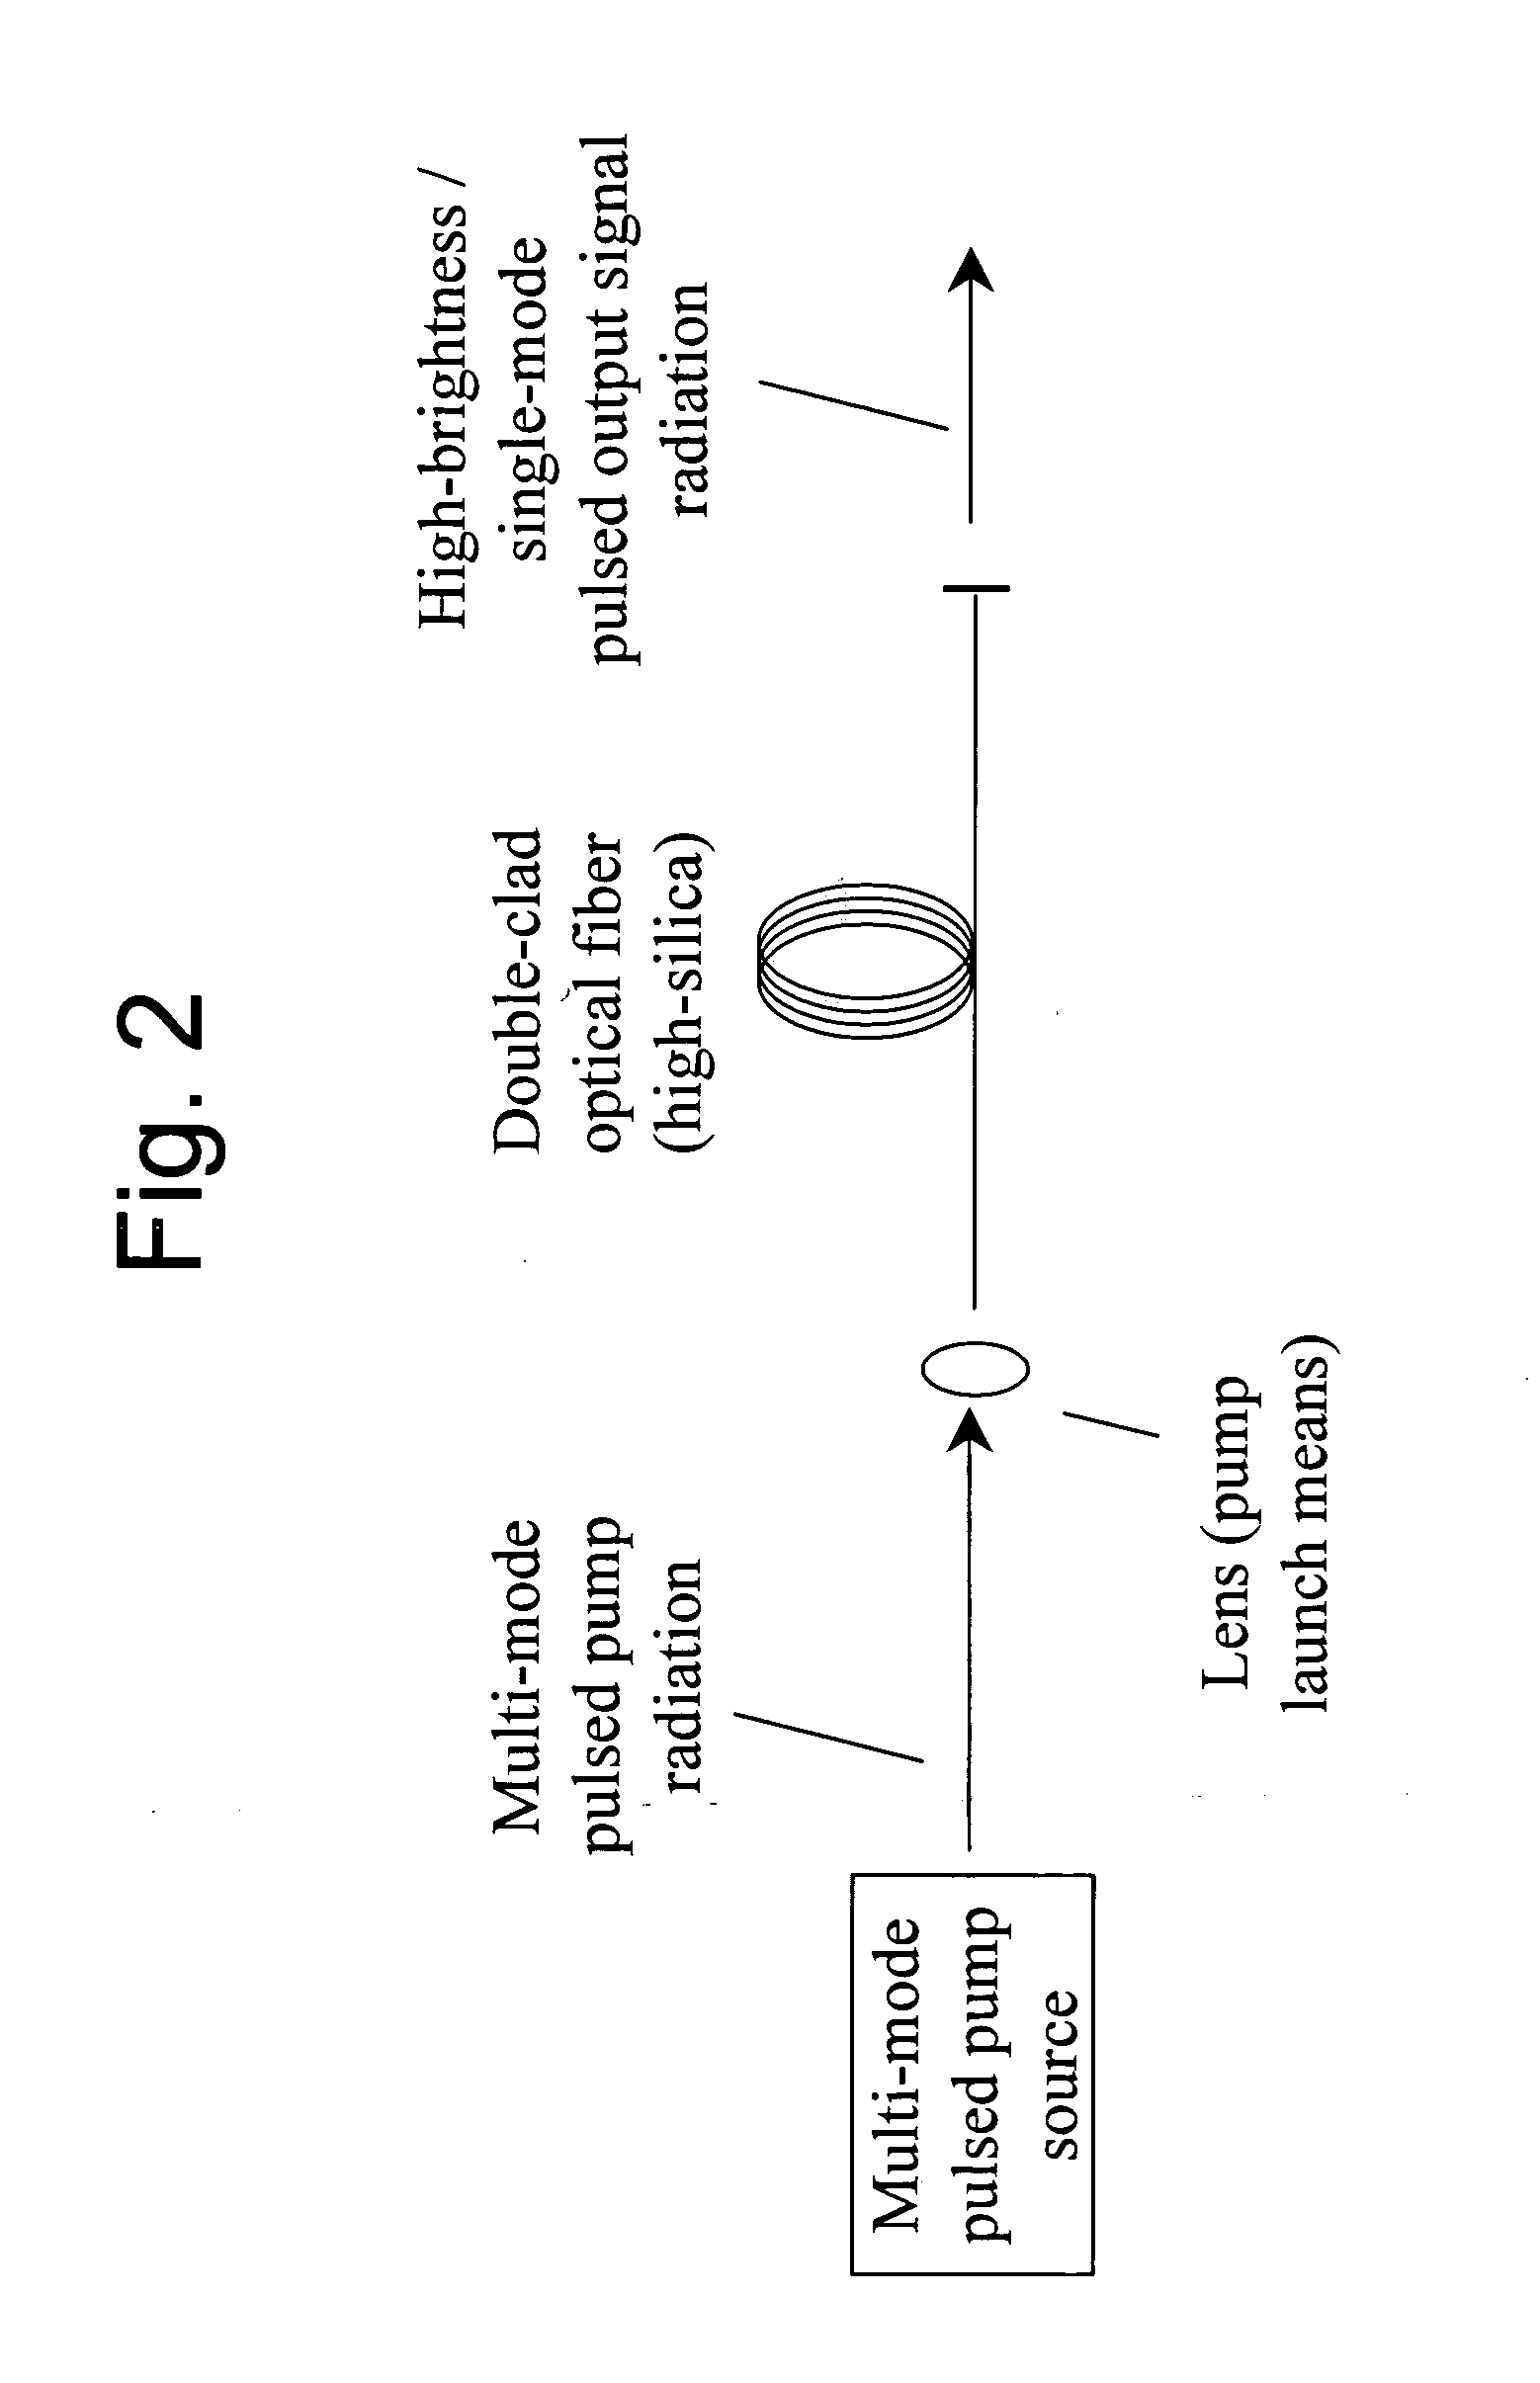 Optical device with immediate gain for brightness enhancement of optical pulses